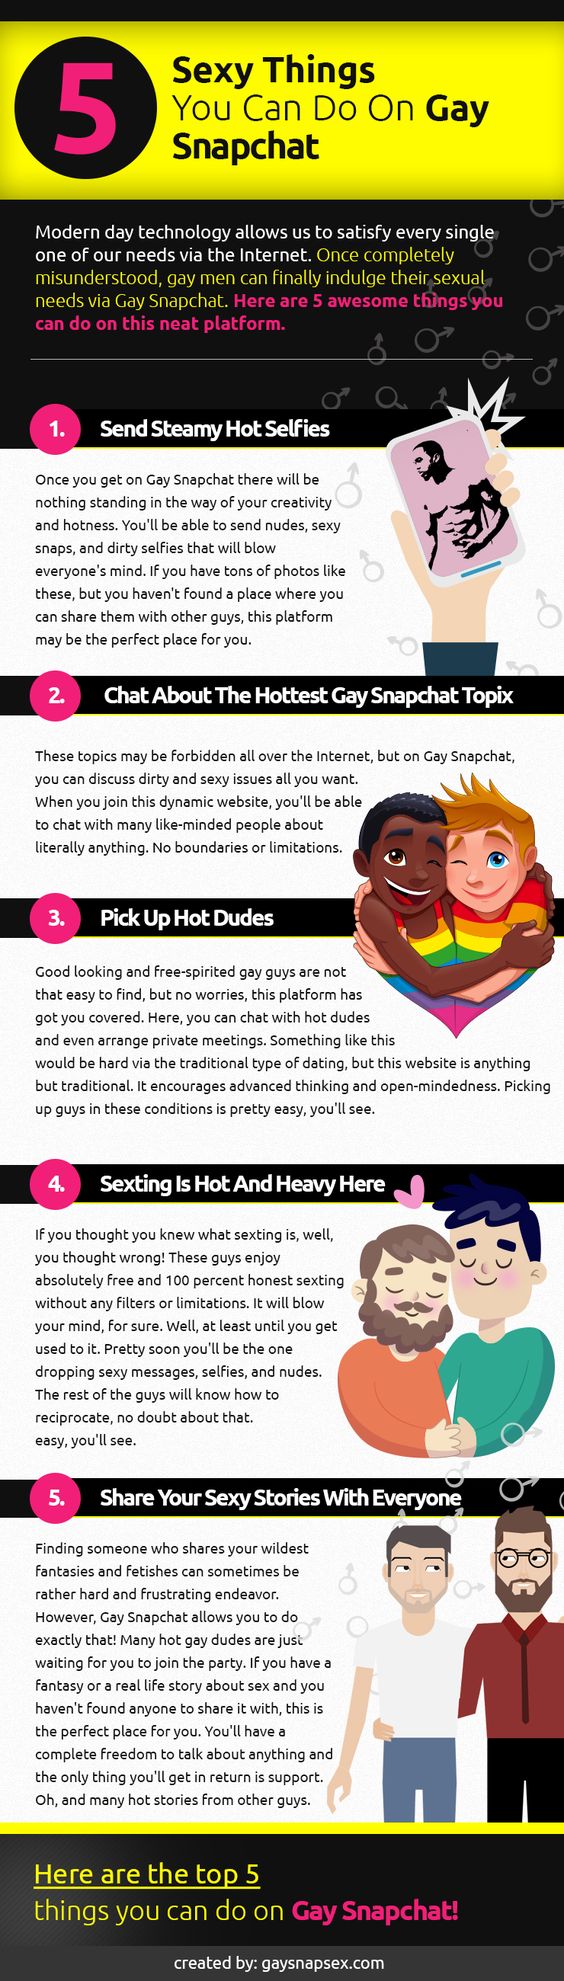 X Sexy Things You Can Do On Gay Snapchat